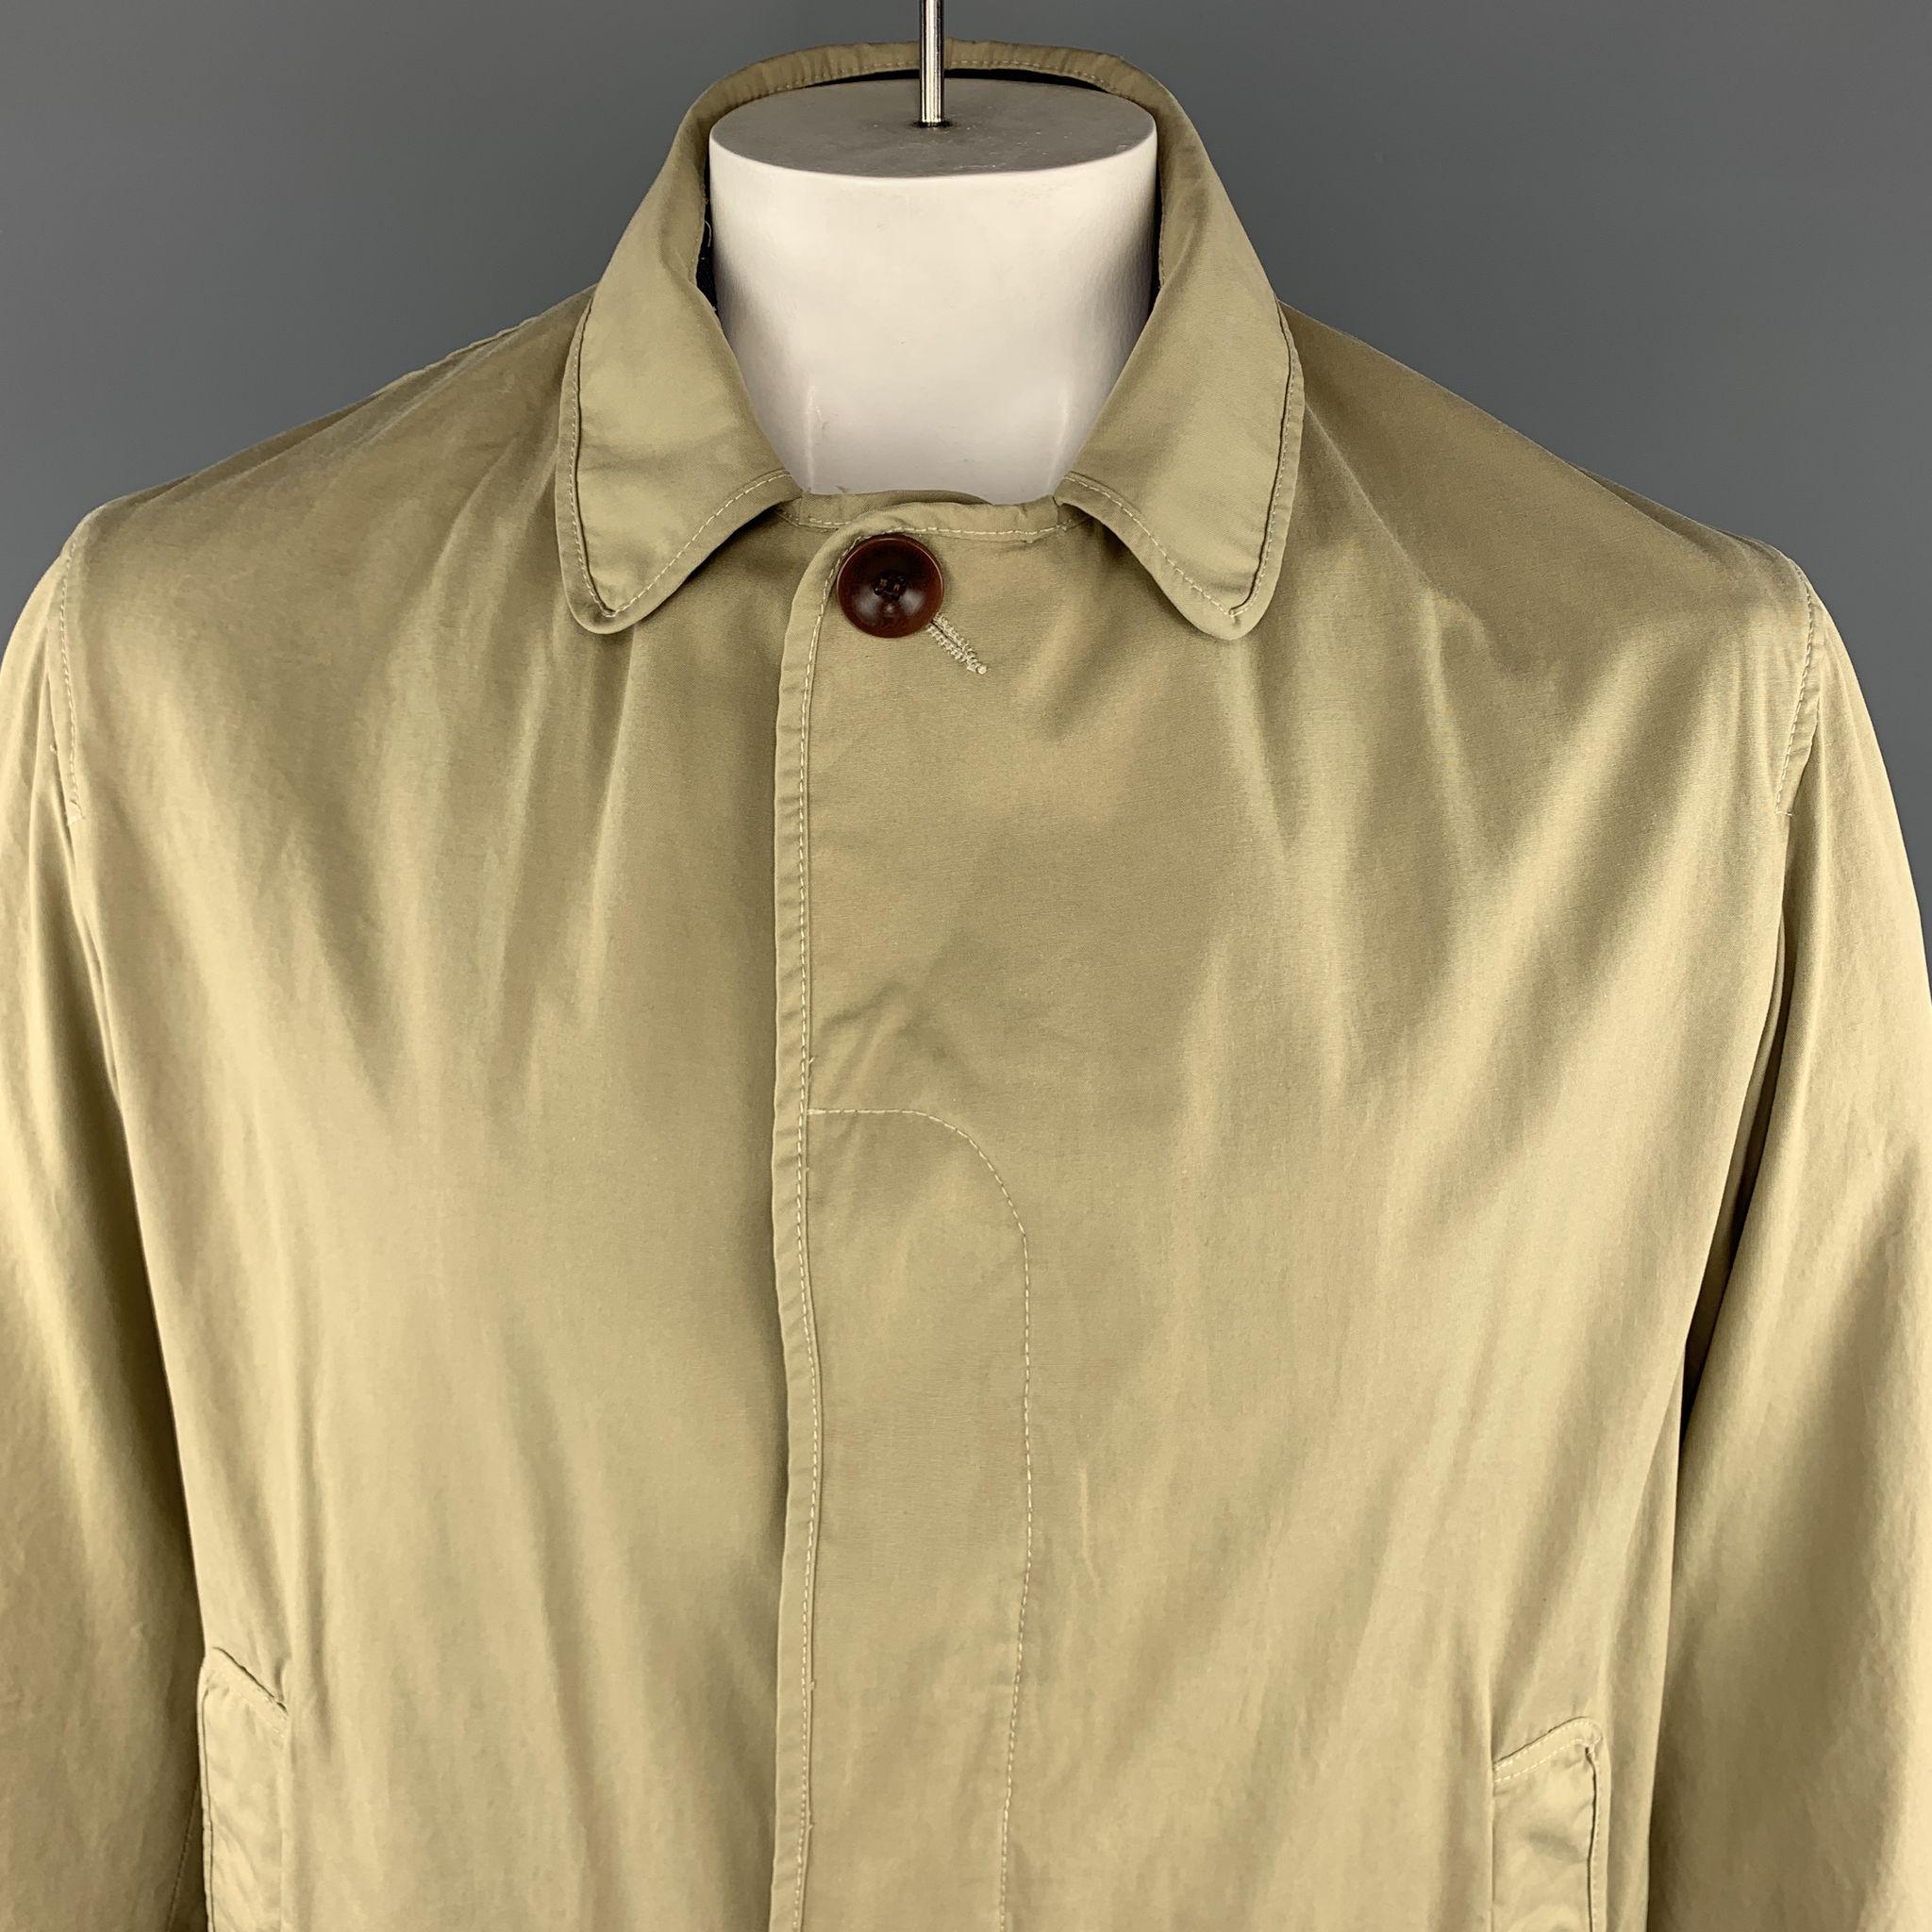 STEVEN ALAN Coat comes in a khaki tone in a solid cotton material, with five buttons at closure, single breasted, slit pockets, unbuttoned cuffs, a double vent at back, and a plaid patchwork lining. Made in USA.
 
Excellent Pre-Owned